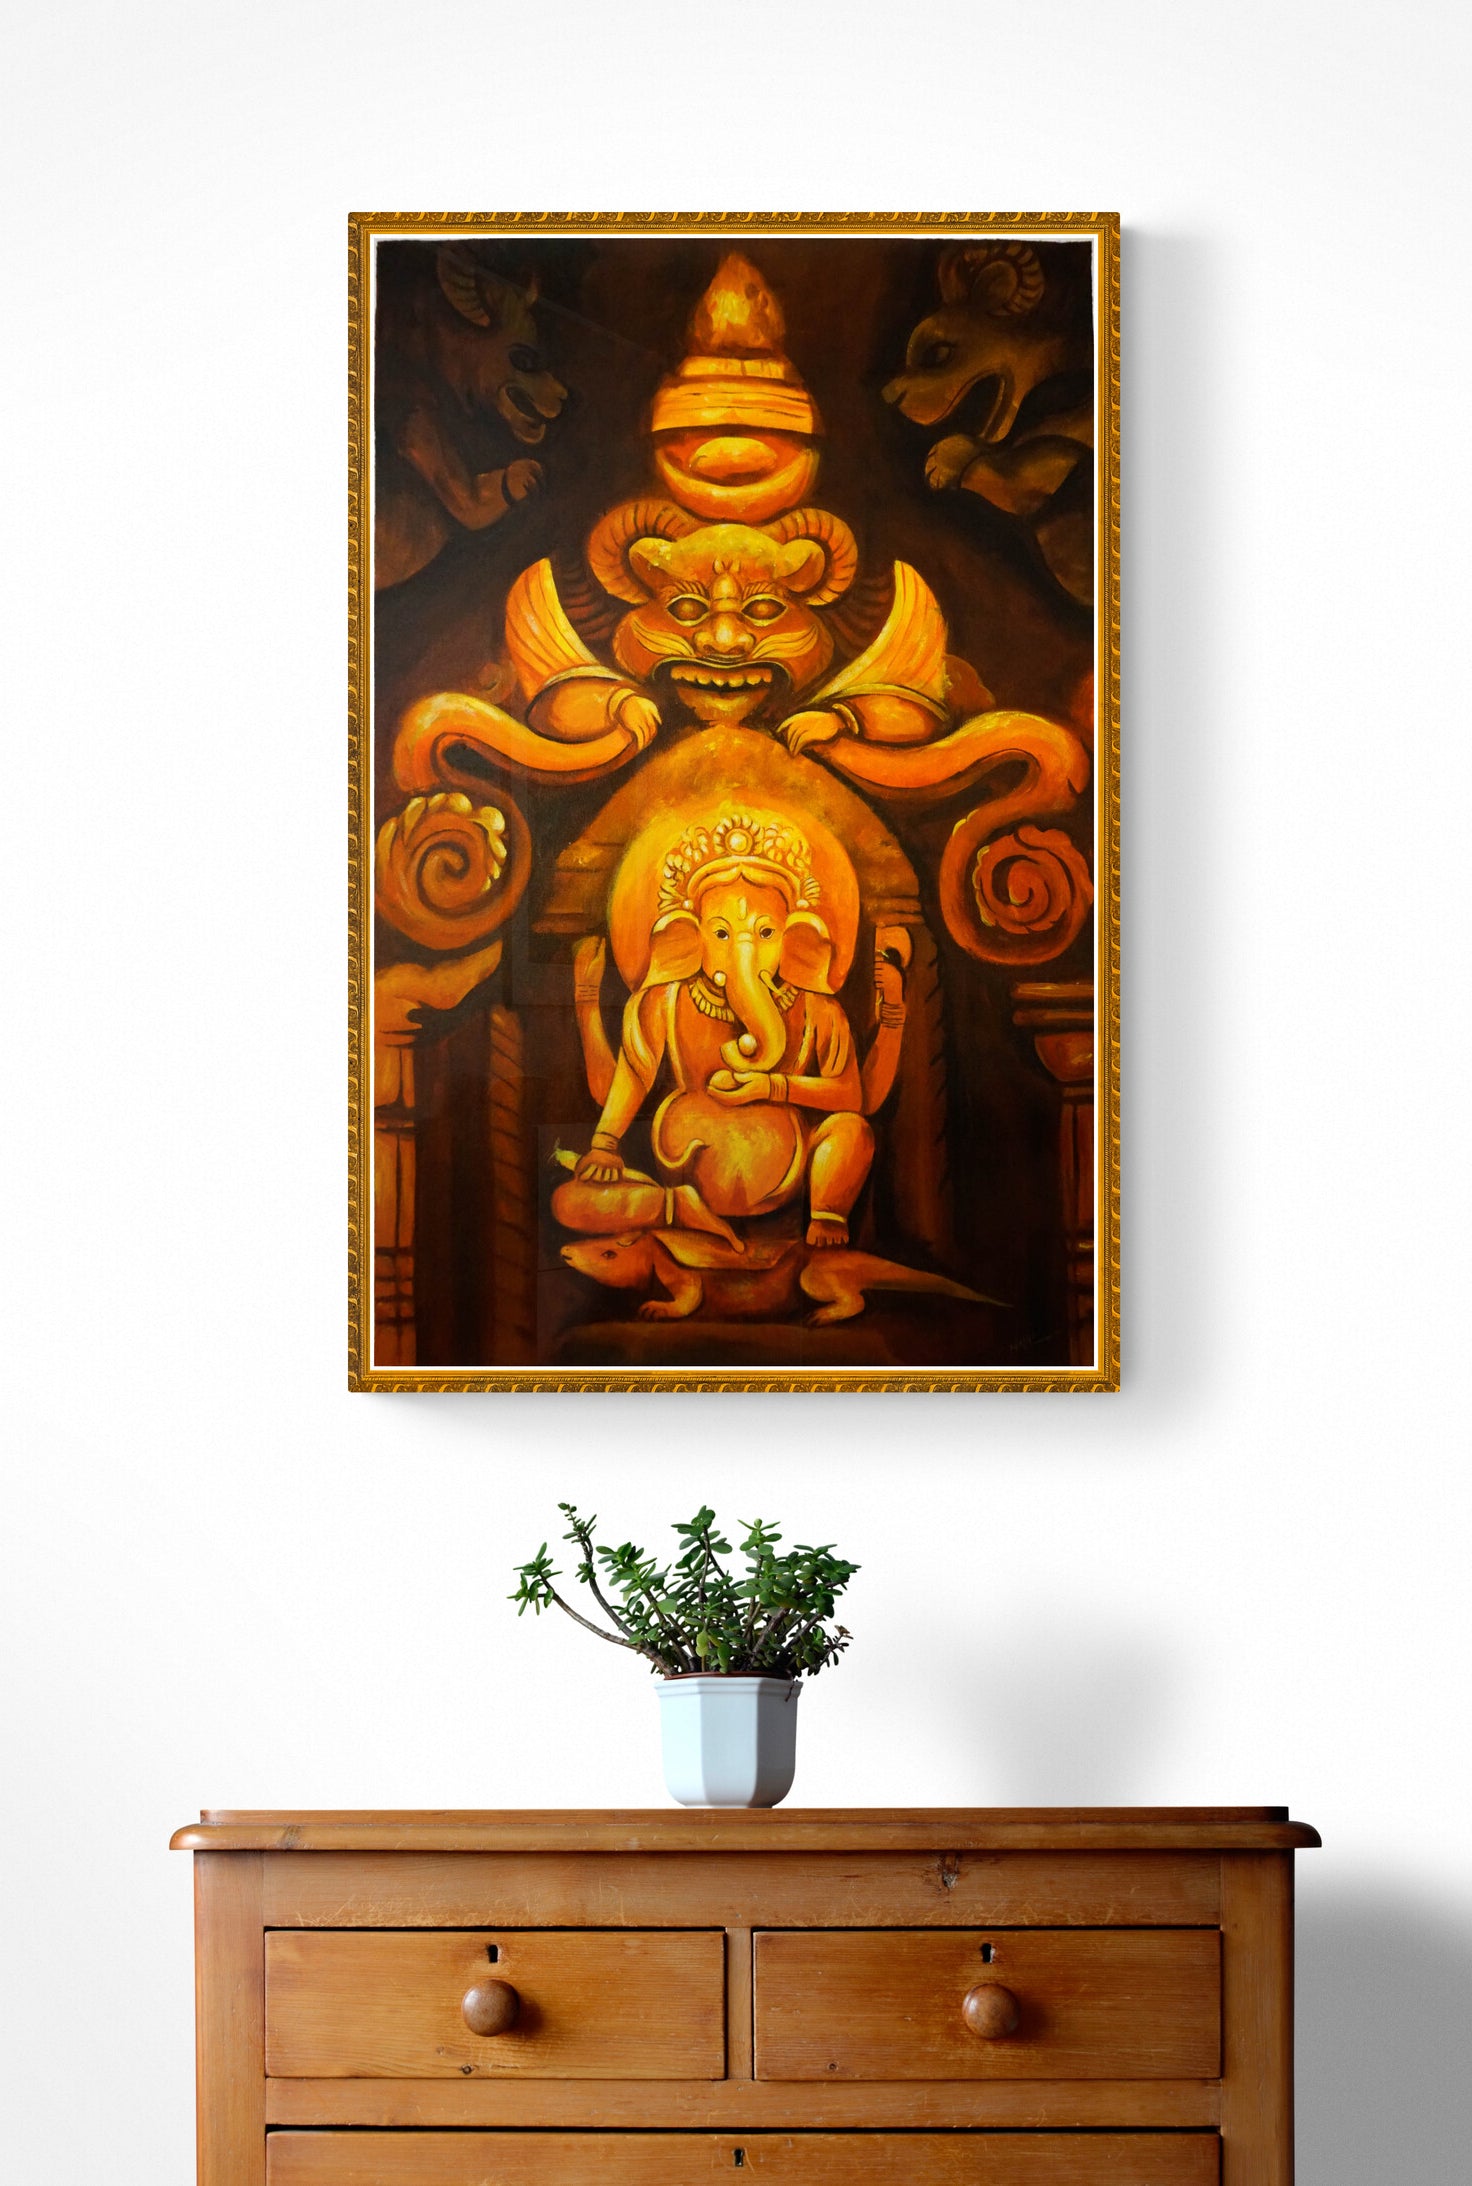 Original Oil Painting of Hindu deity, Ganesh - Hand Painted Nepalese Painting - Best for room decoration and positive vibration